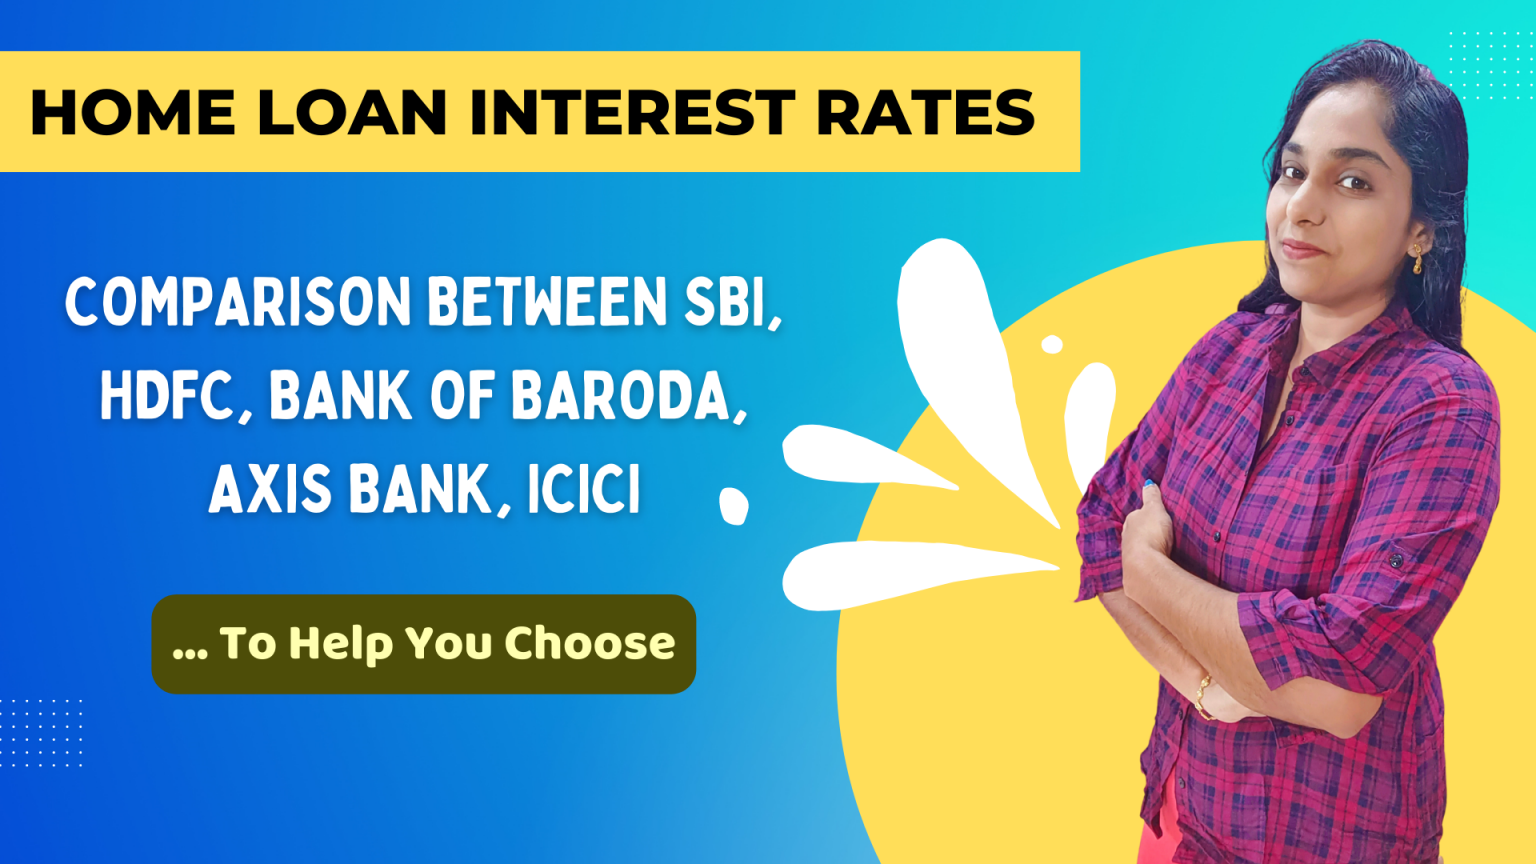 Home Loan Interest Rates Comparison Between Sbi Hdfc Bank Of Baroda Axis Bank To Help You Choose 3734